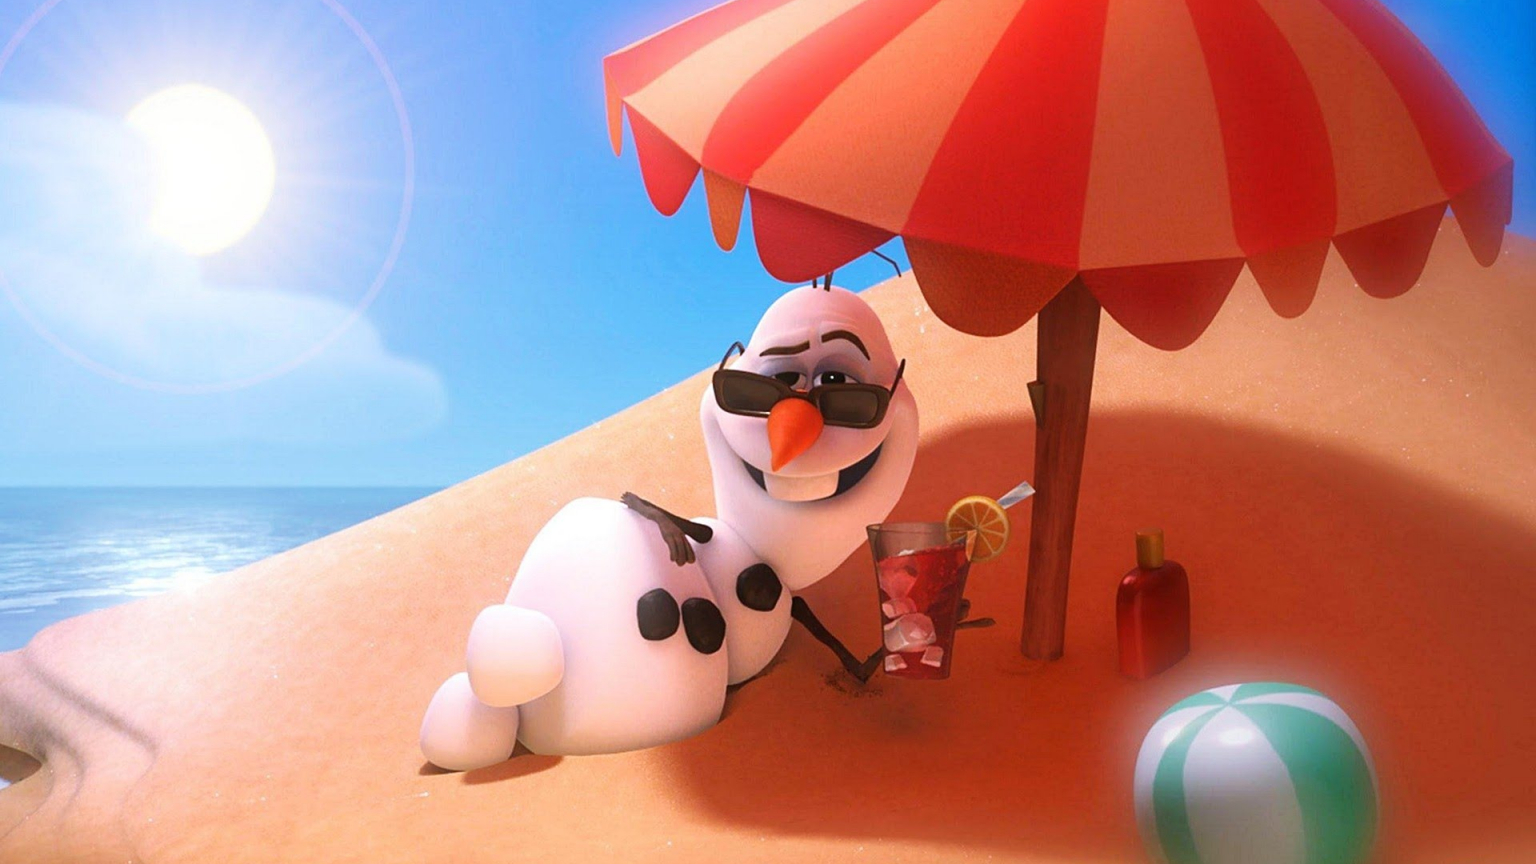 In summer olaf frozen mp3 download